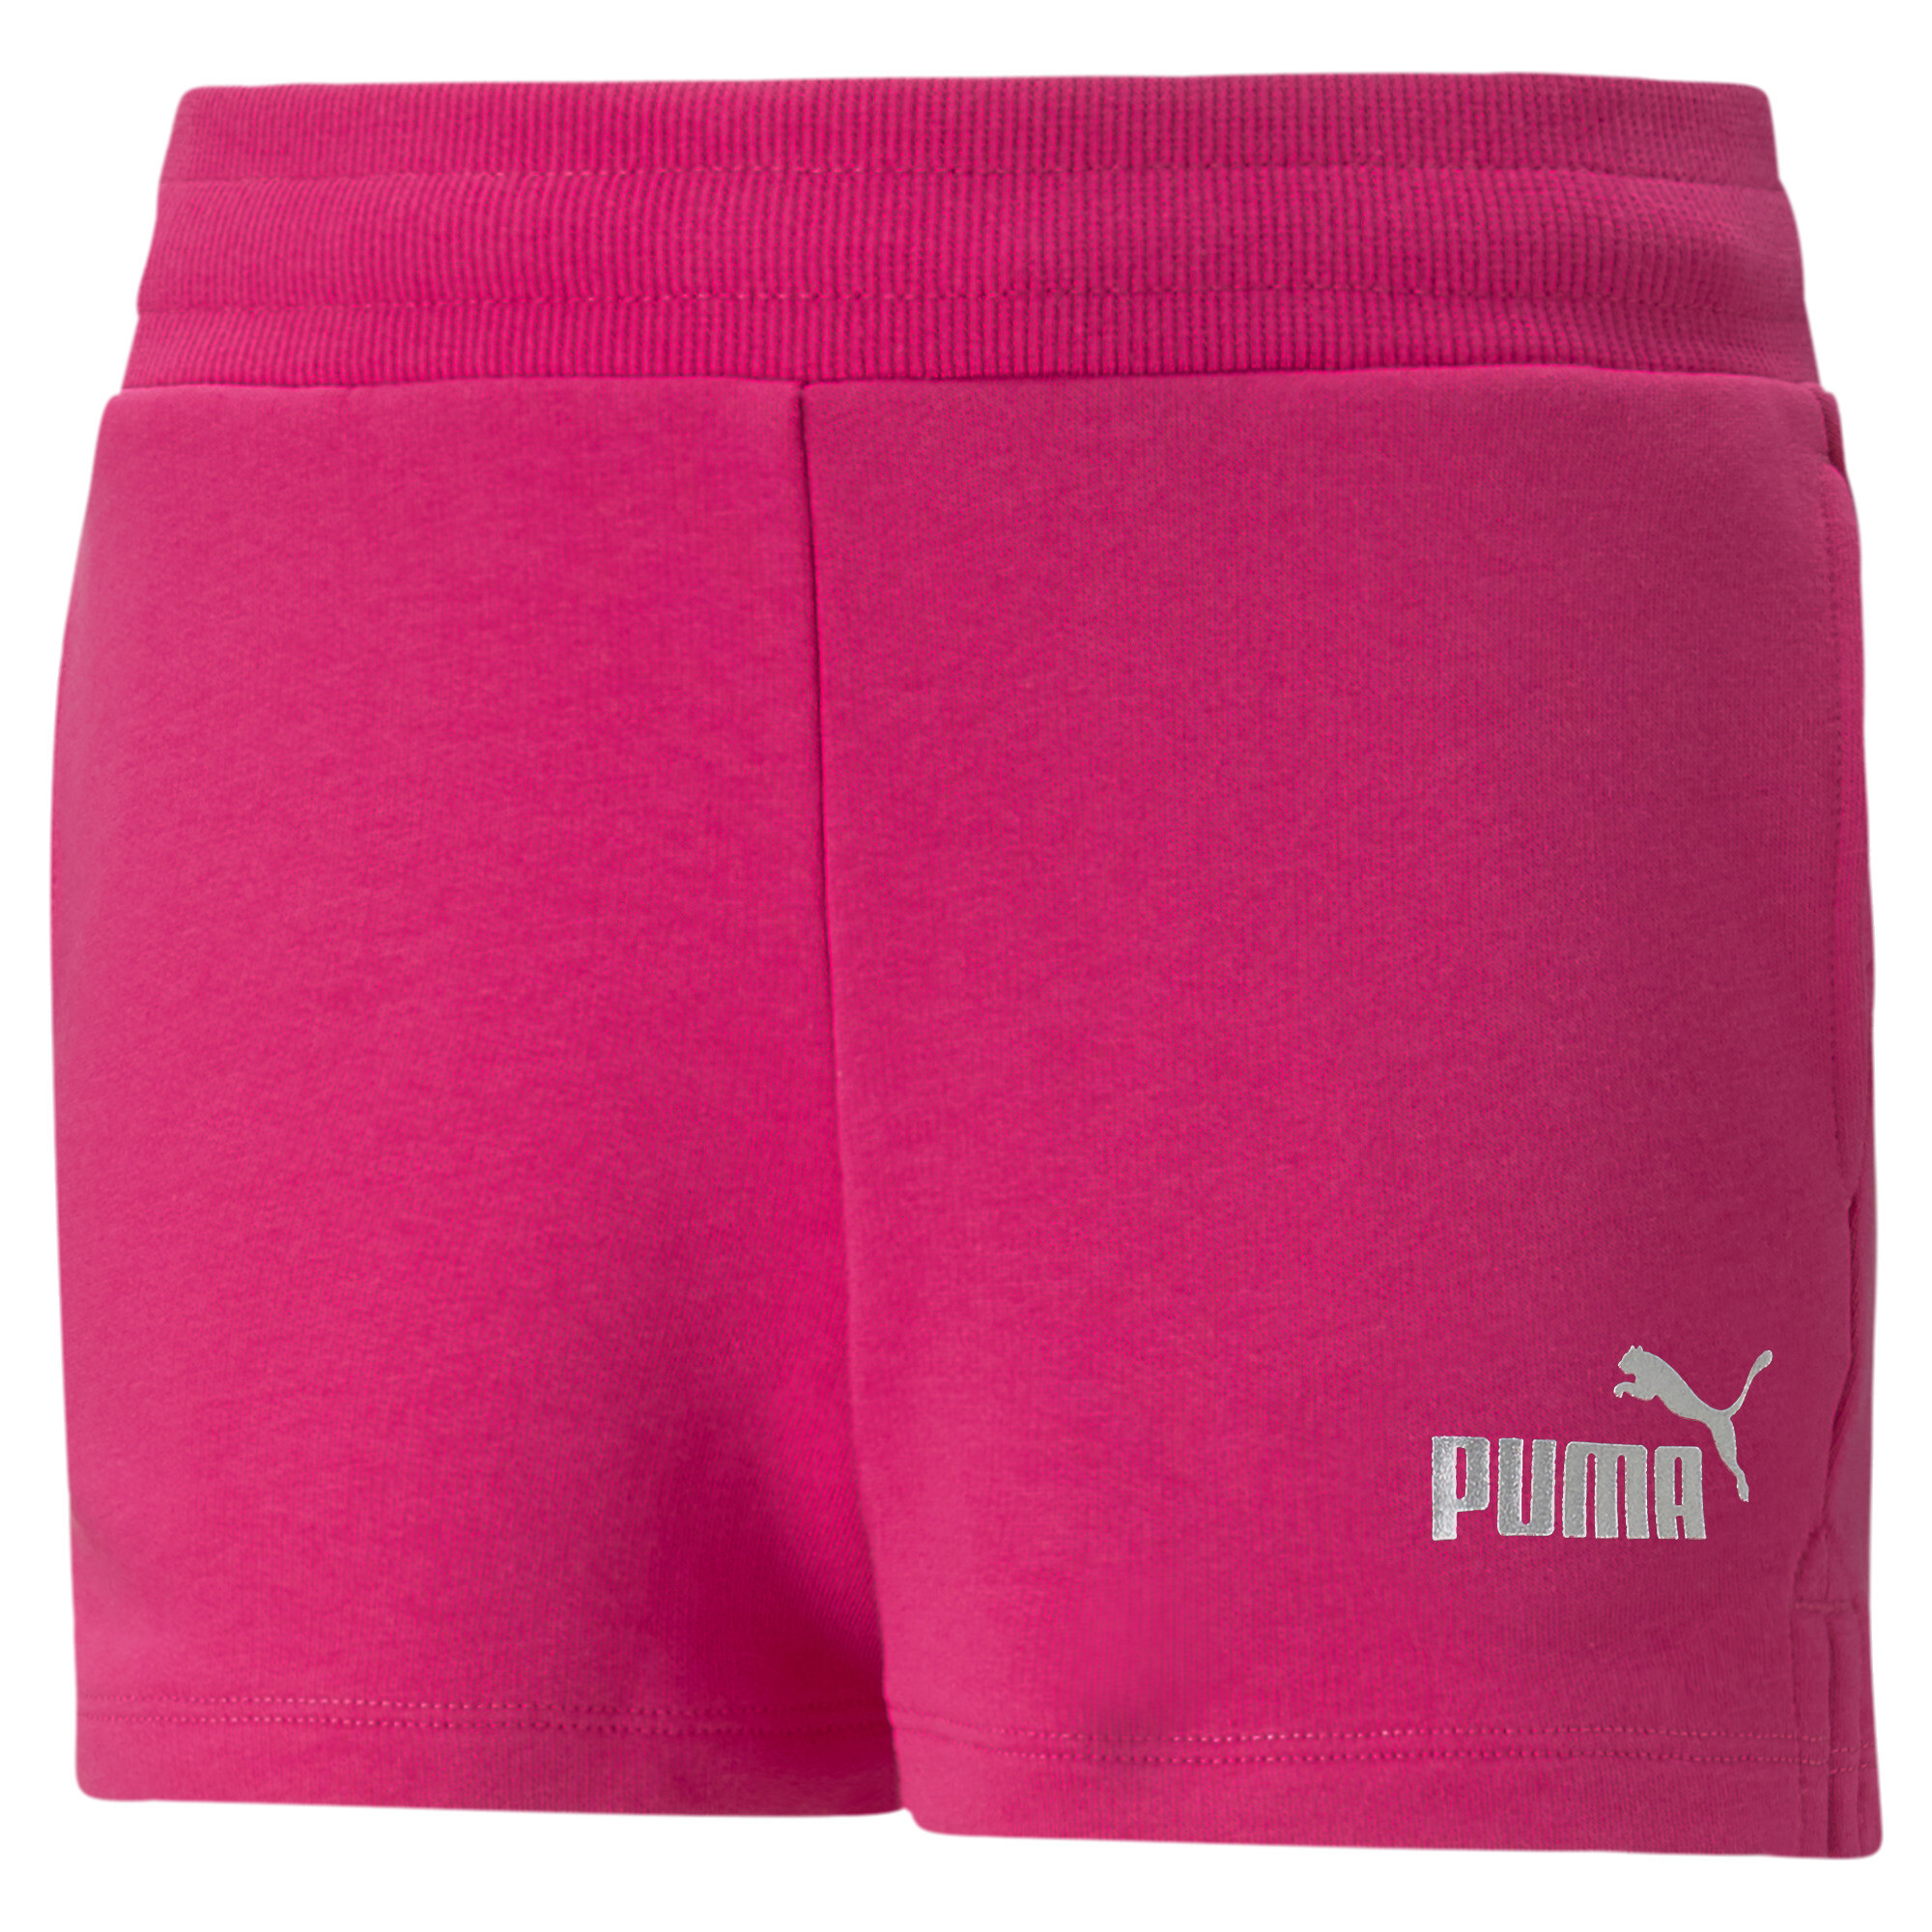 Women's Puma Essentials+ Youth Shorts, Pink, Size 15-16Y, Clothing